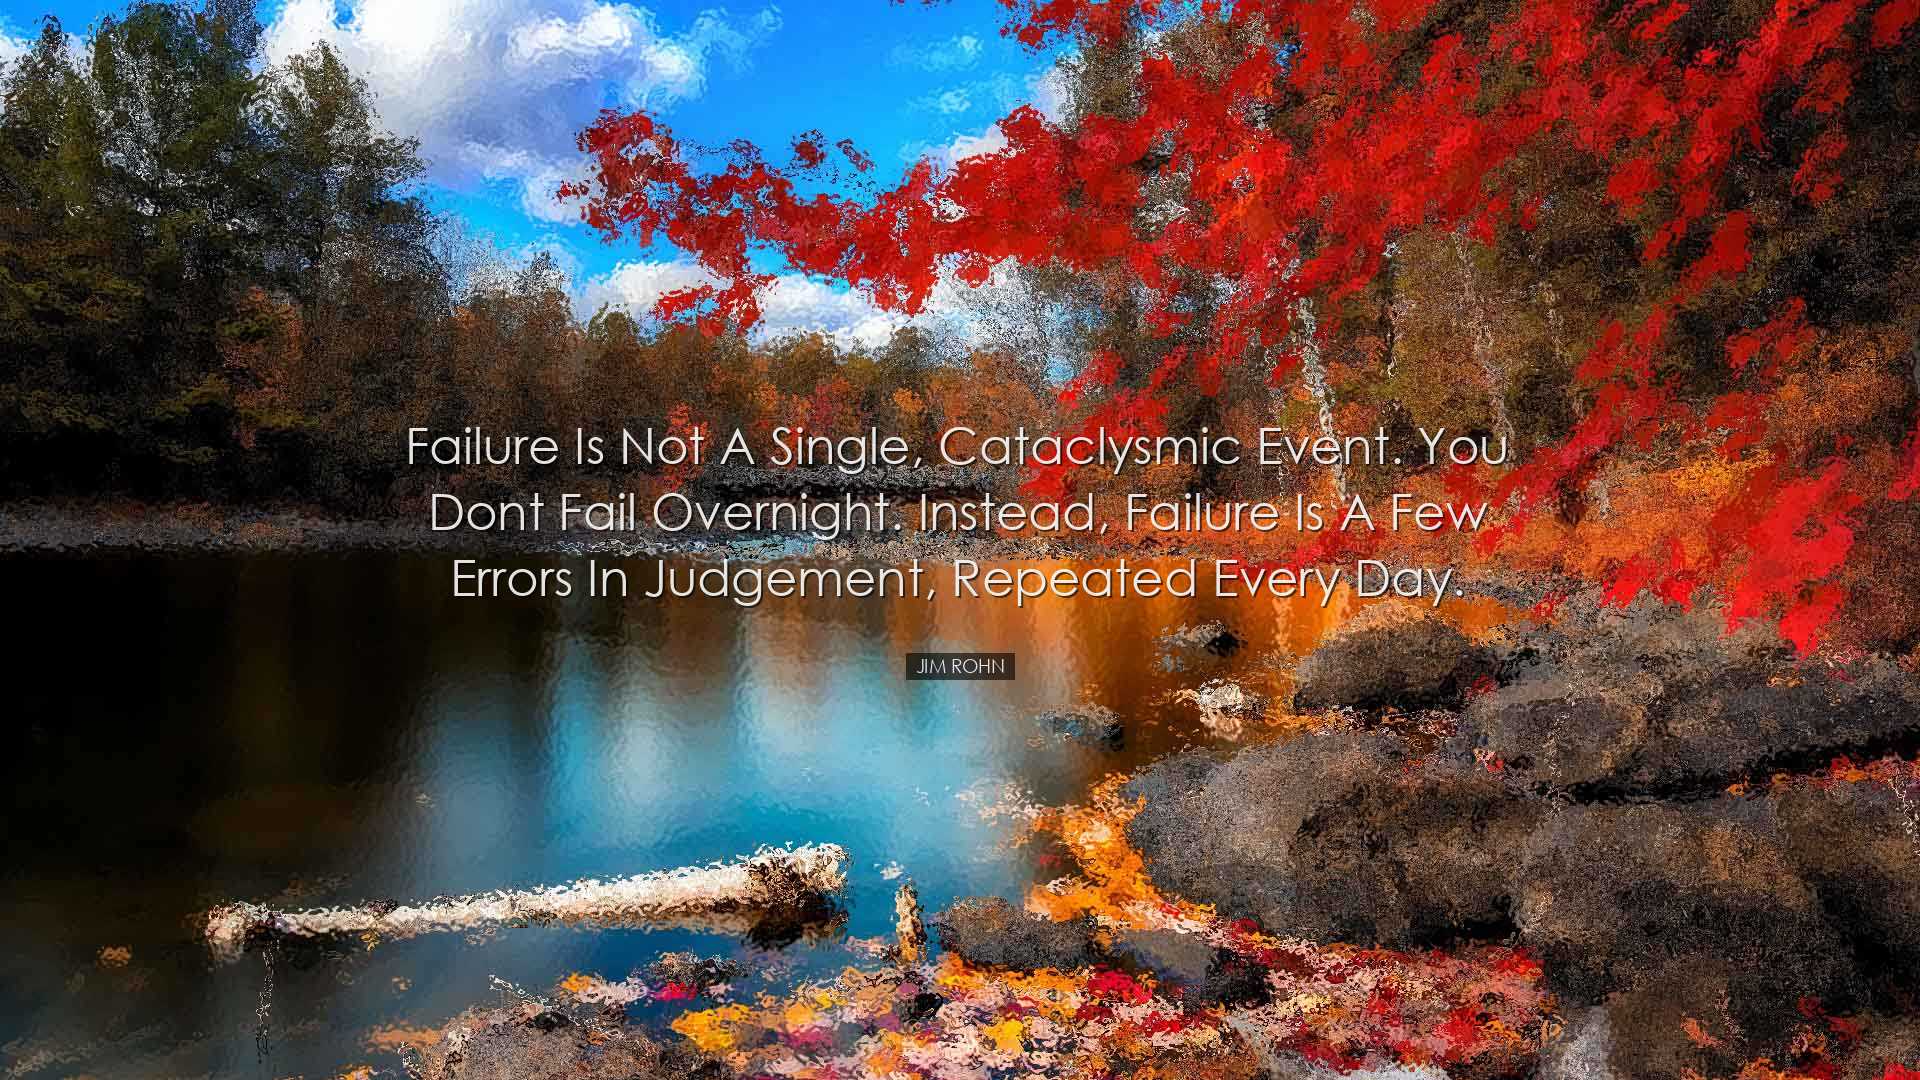 Failure is not a single, cataclysmic event. You dont fail overnigh